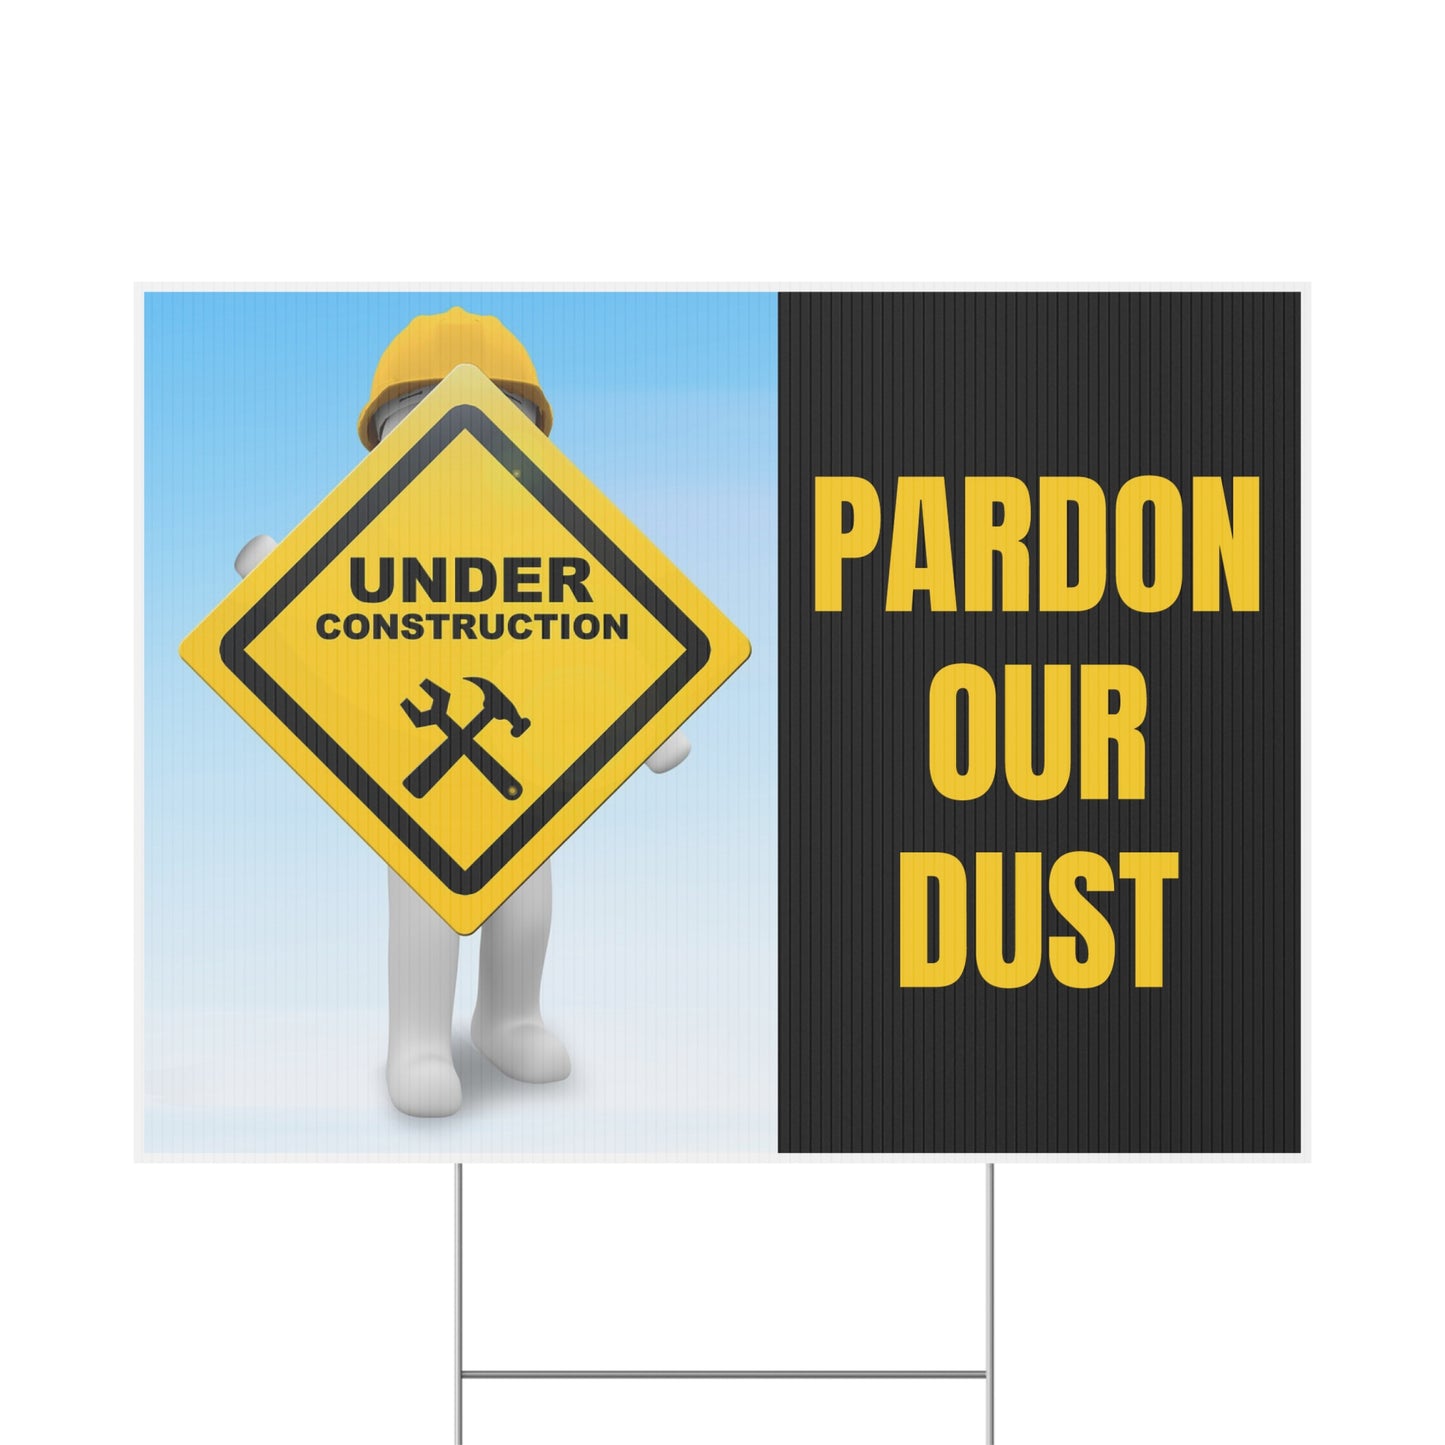 Pardon Our Dust, Under Construction, Remodeling, Yard Sign, 18x12, 24x18, 36x24, v1